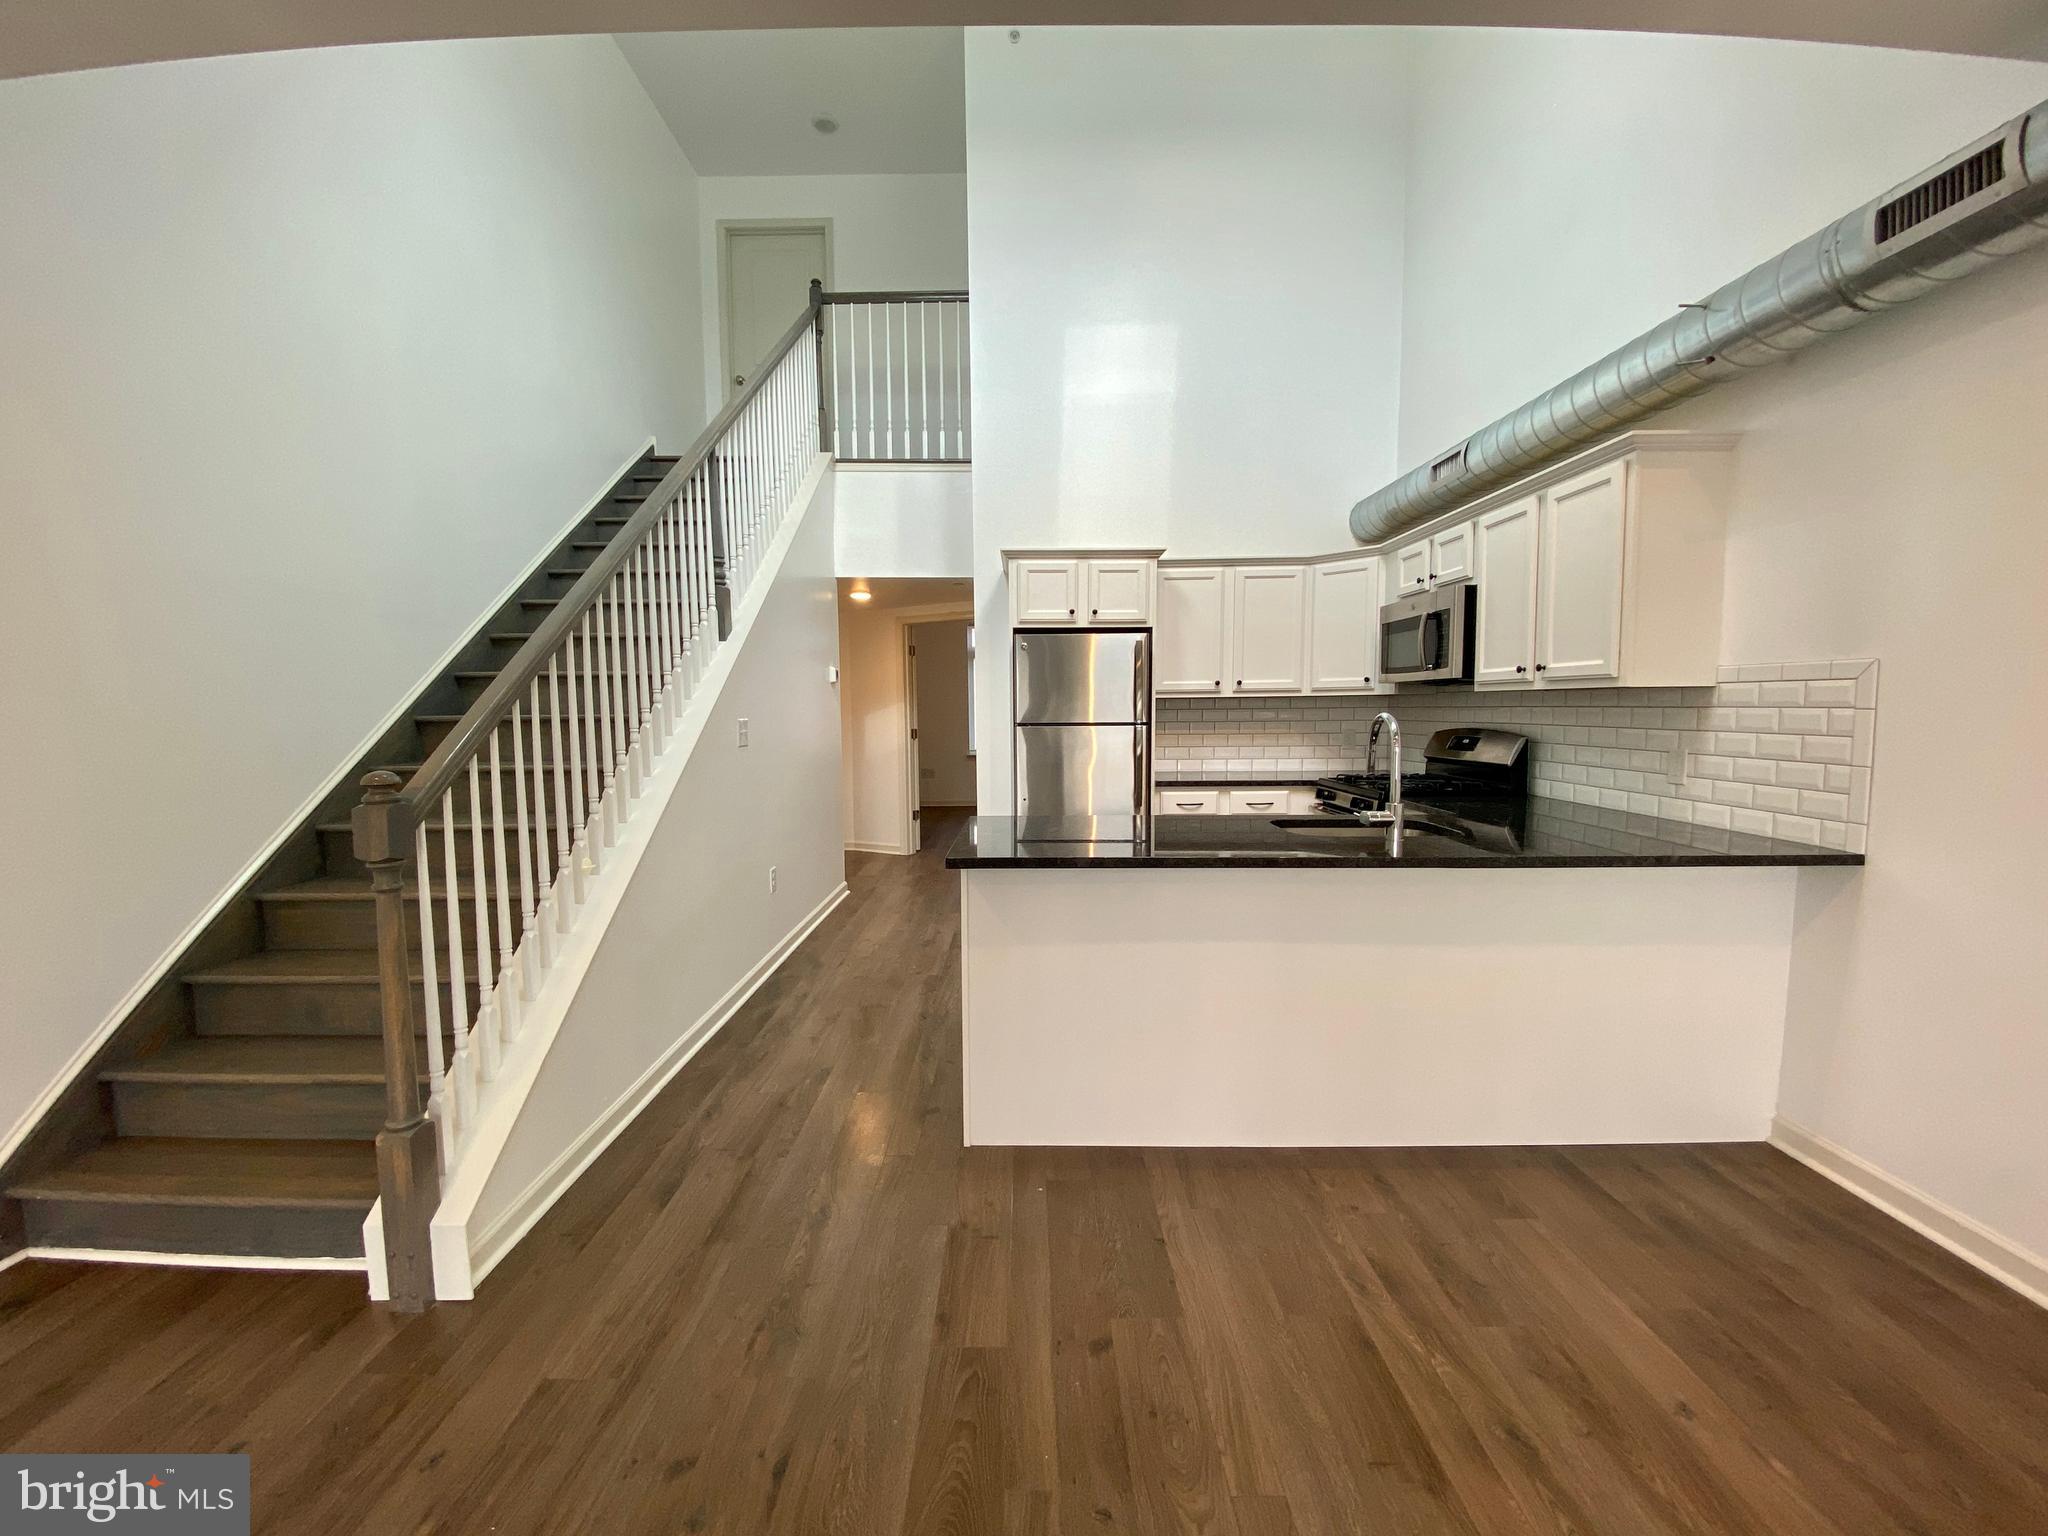 a view of a kitchen with wooden floor and stairs